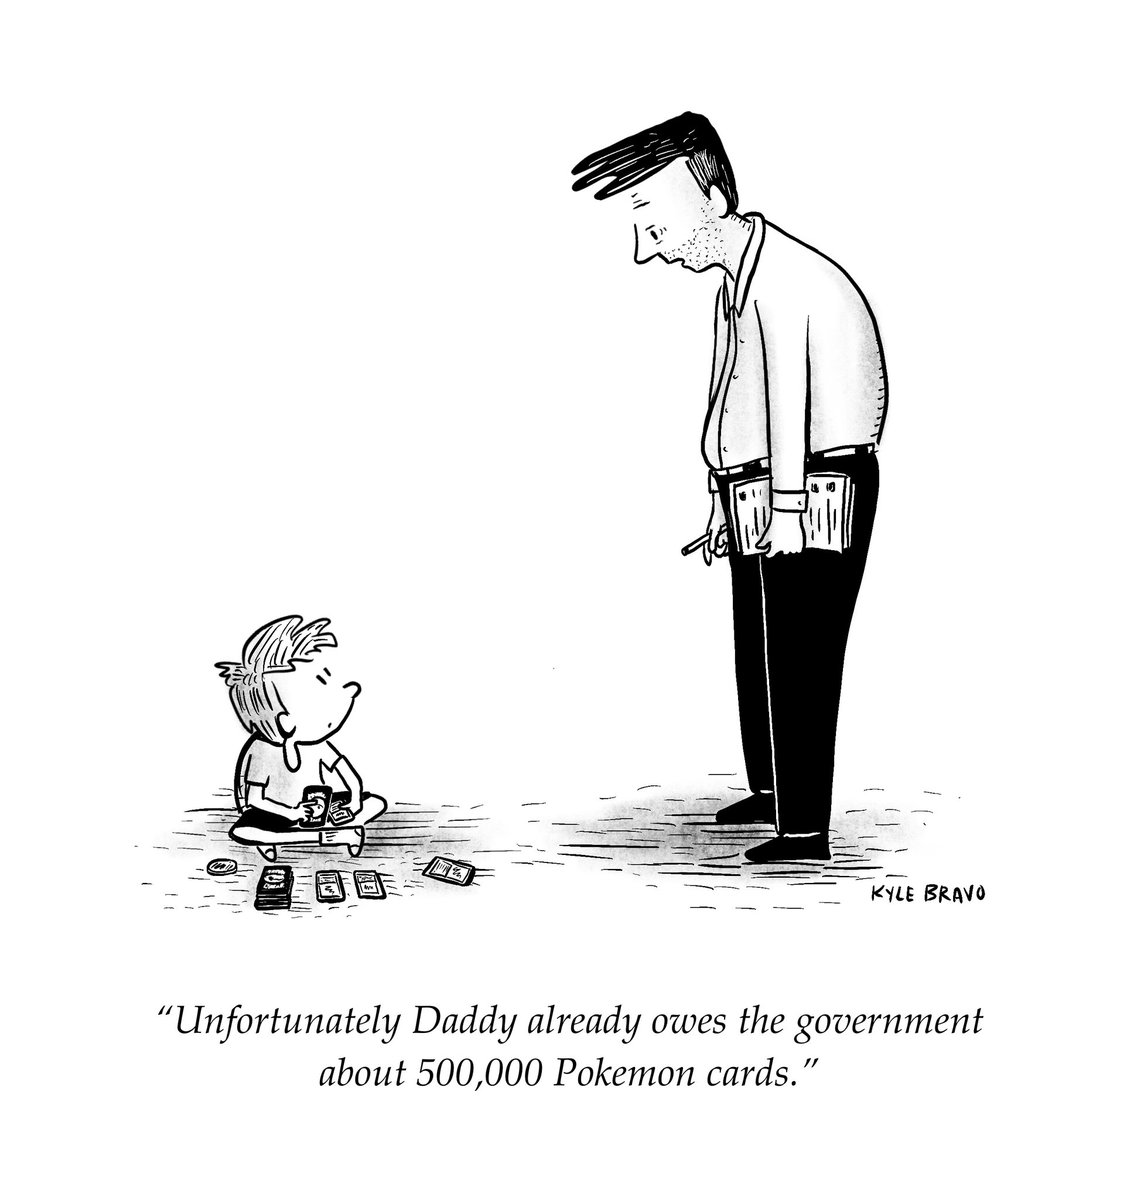 Tax toons.
#gagcartoon #taxes #childtaxcredit #fishing #cpa #certifiedpublicaccountant #pokemon #pokemoncards #taxmemes #taxjokes